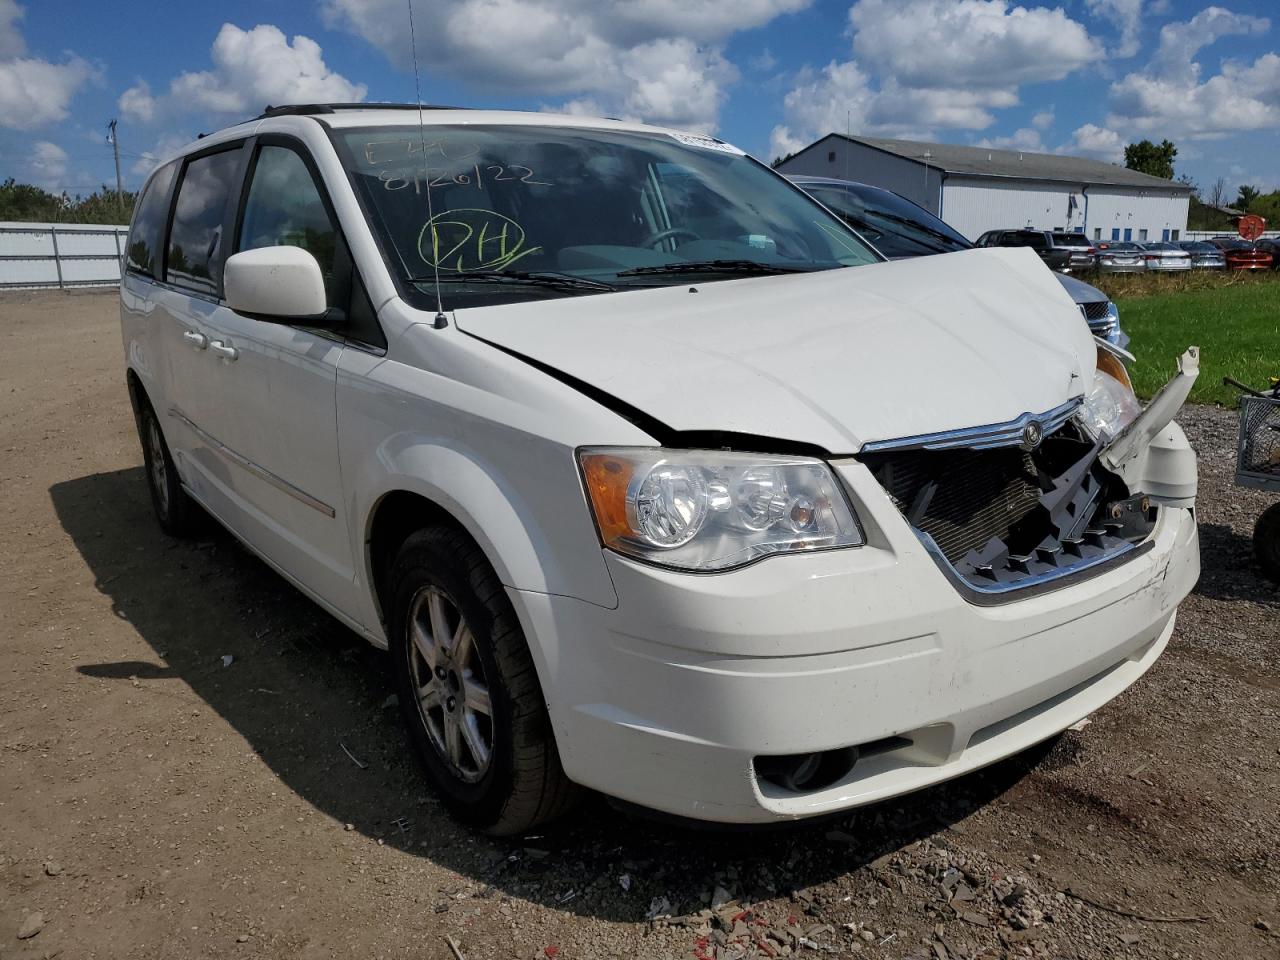 2010 CHRYSLER TOWN & COUNTRY TOURING VIN: 2A4RR5D12AR113947